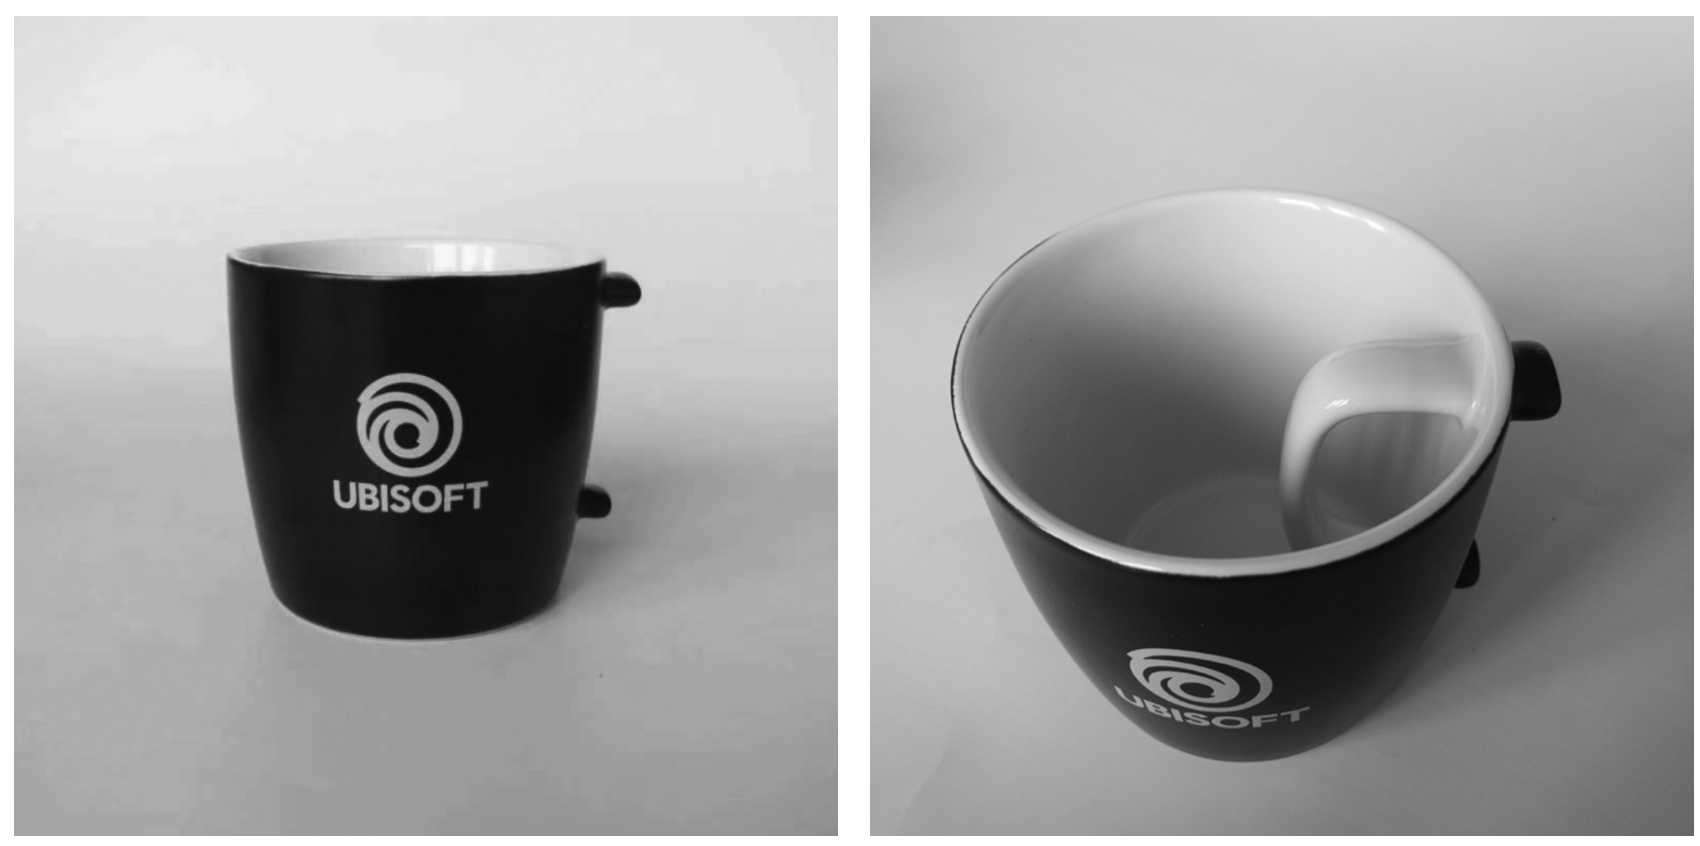 Ubisoft Released Cups Containing BUG in a Marketing Campaign in China